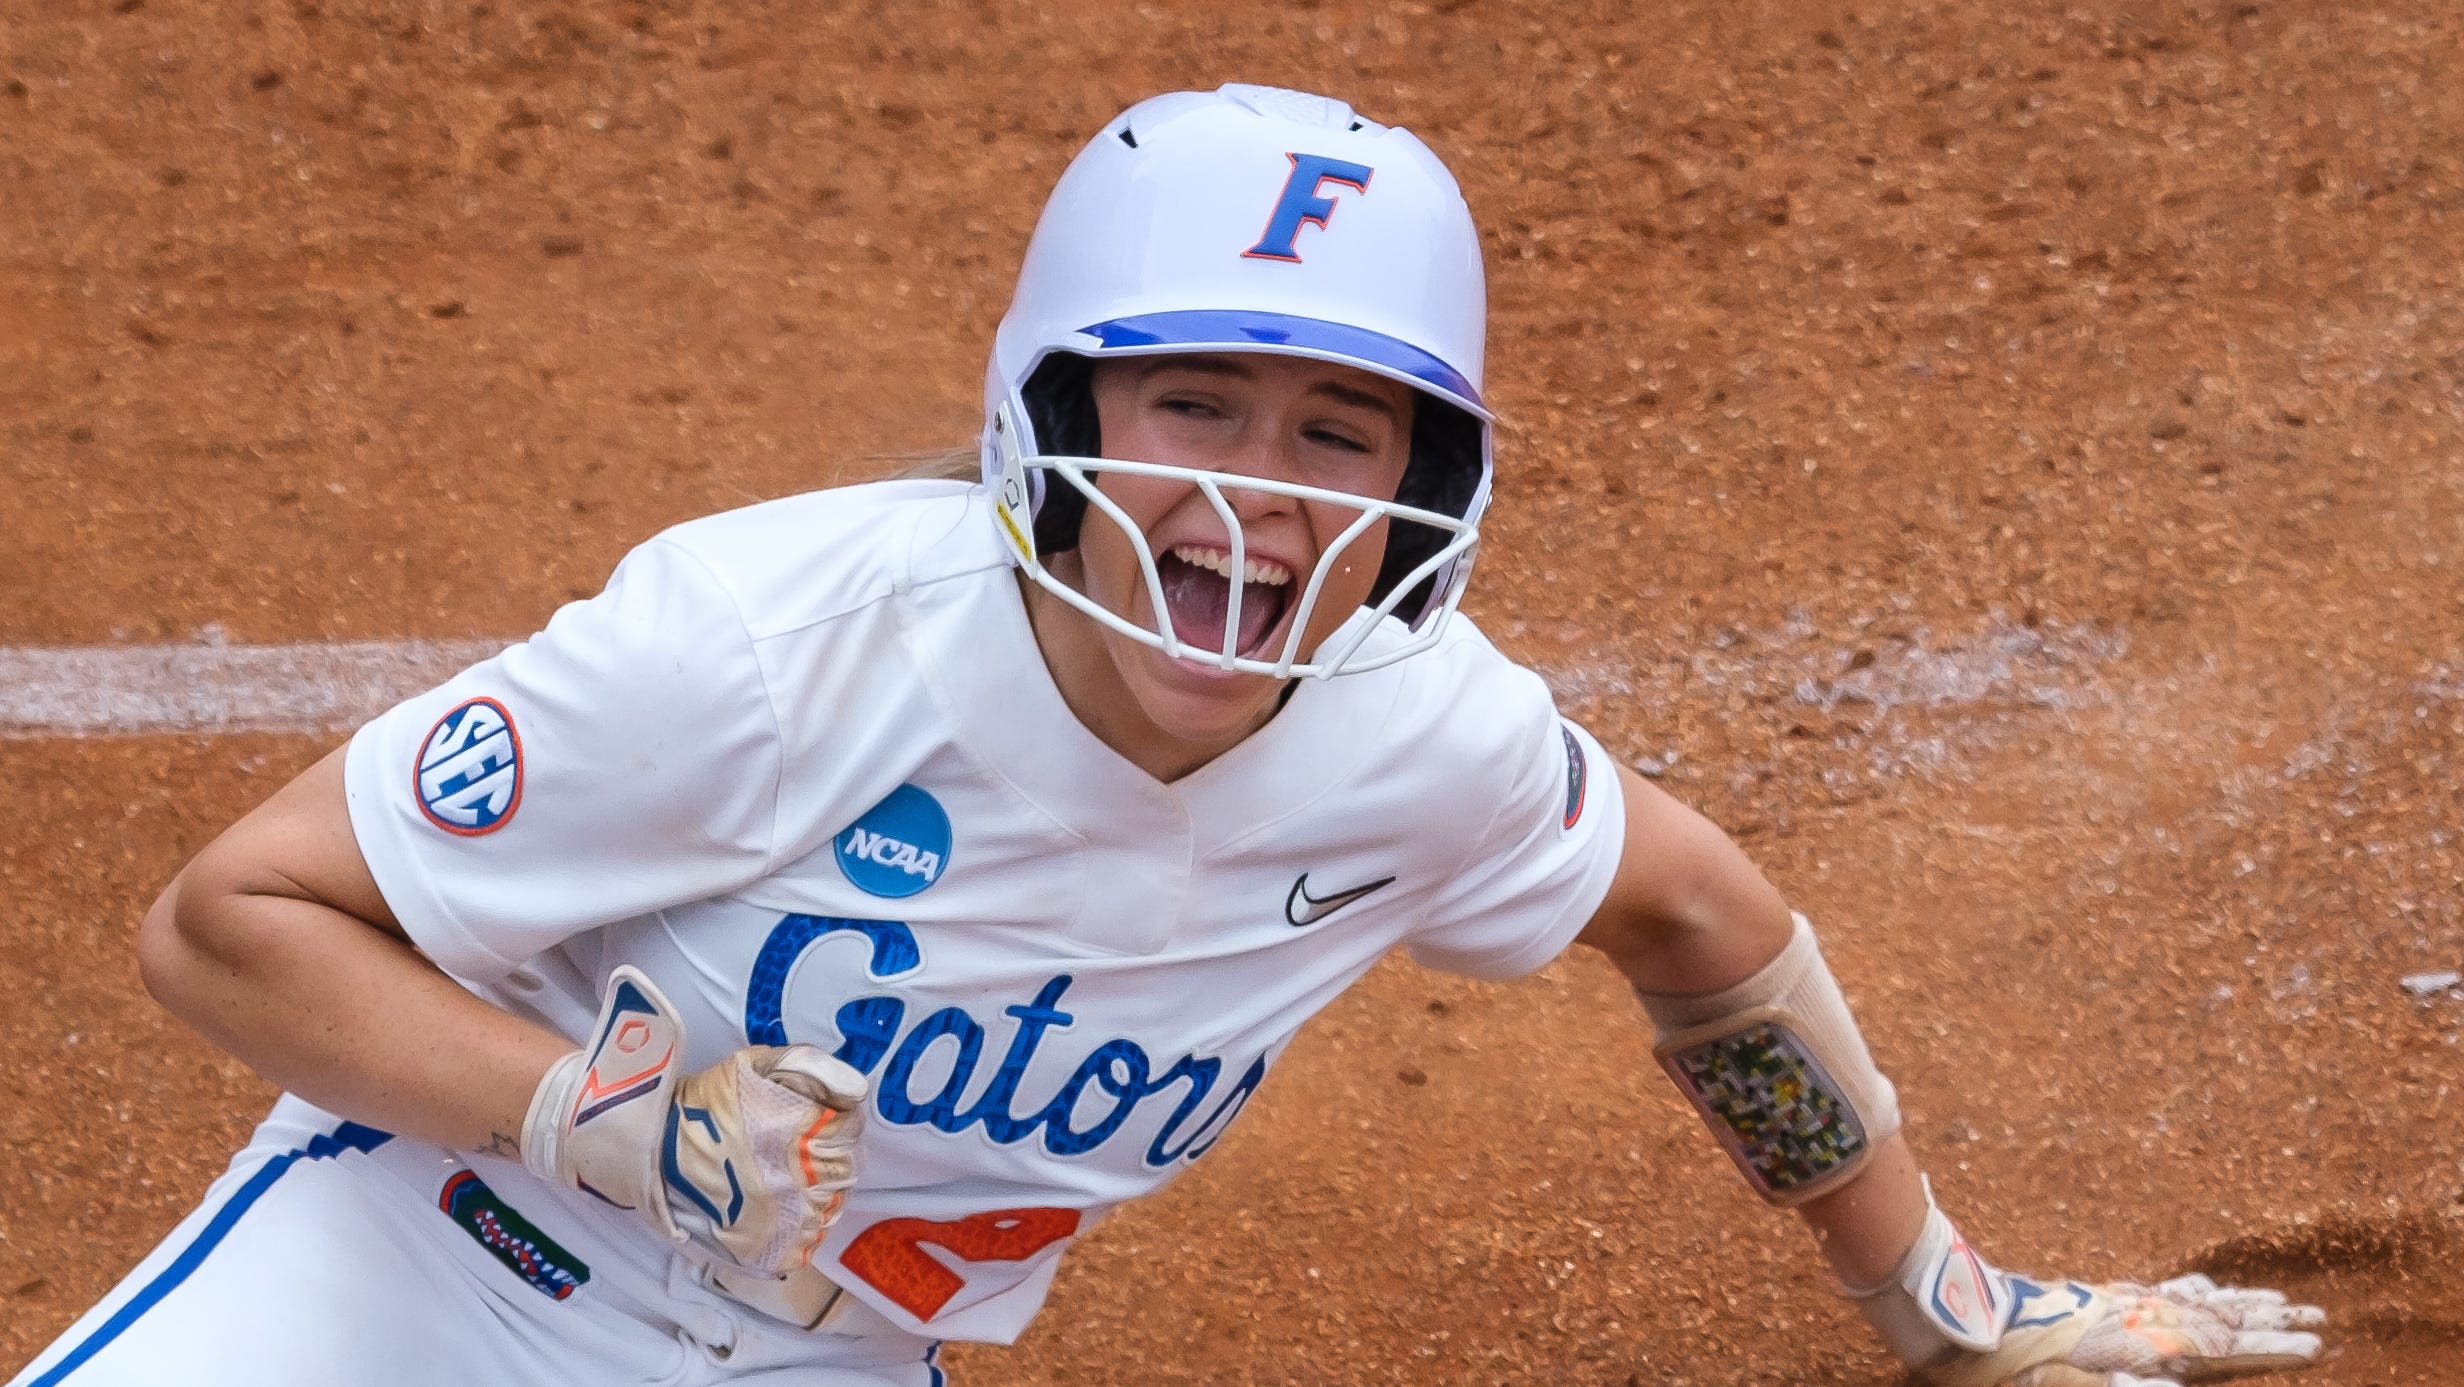 Rothrock shines in the circle, helps overcome at times slow offensive day for Florida softball vs FGCU